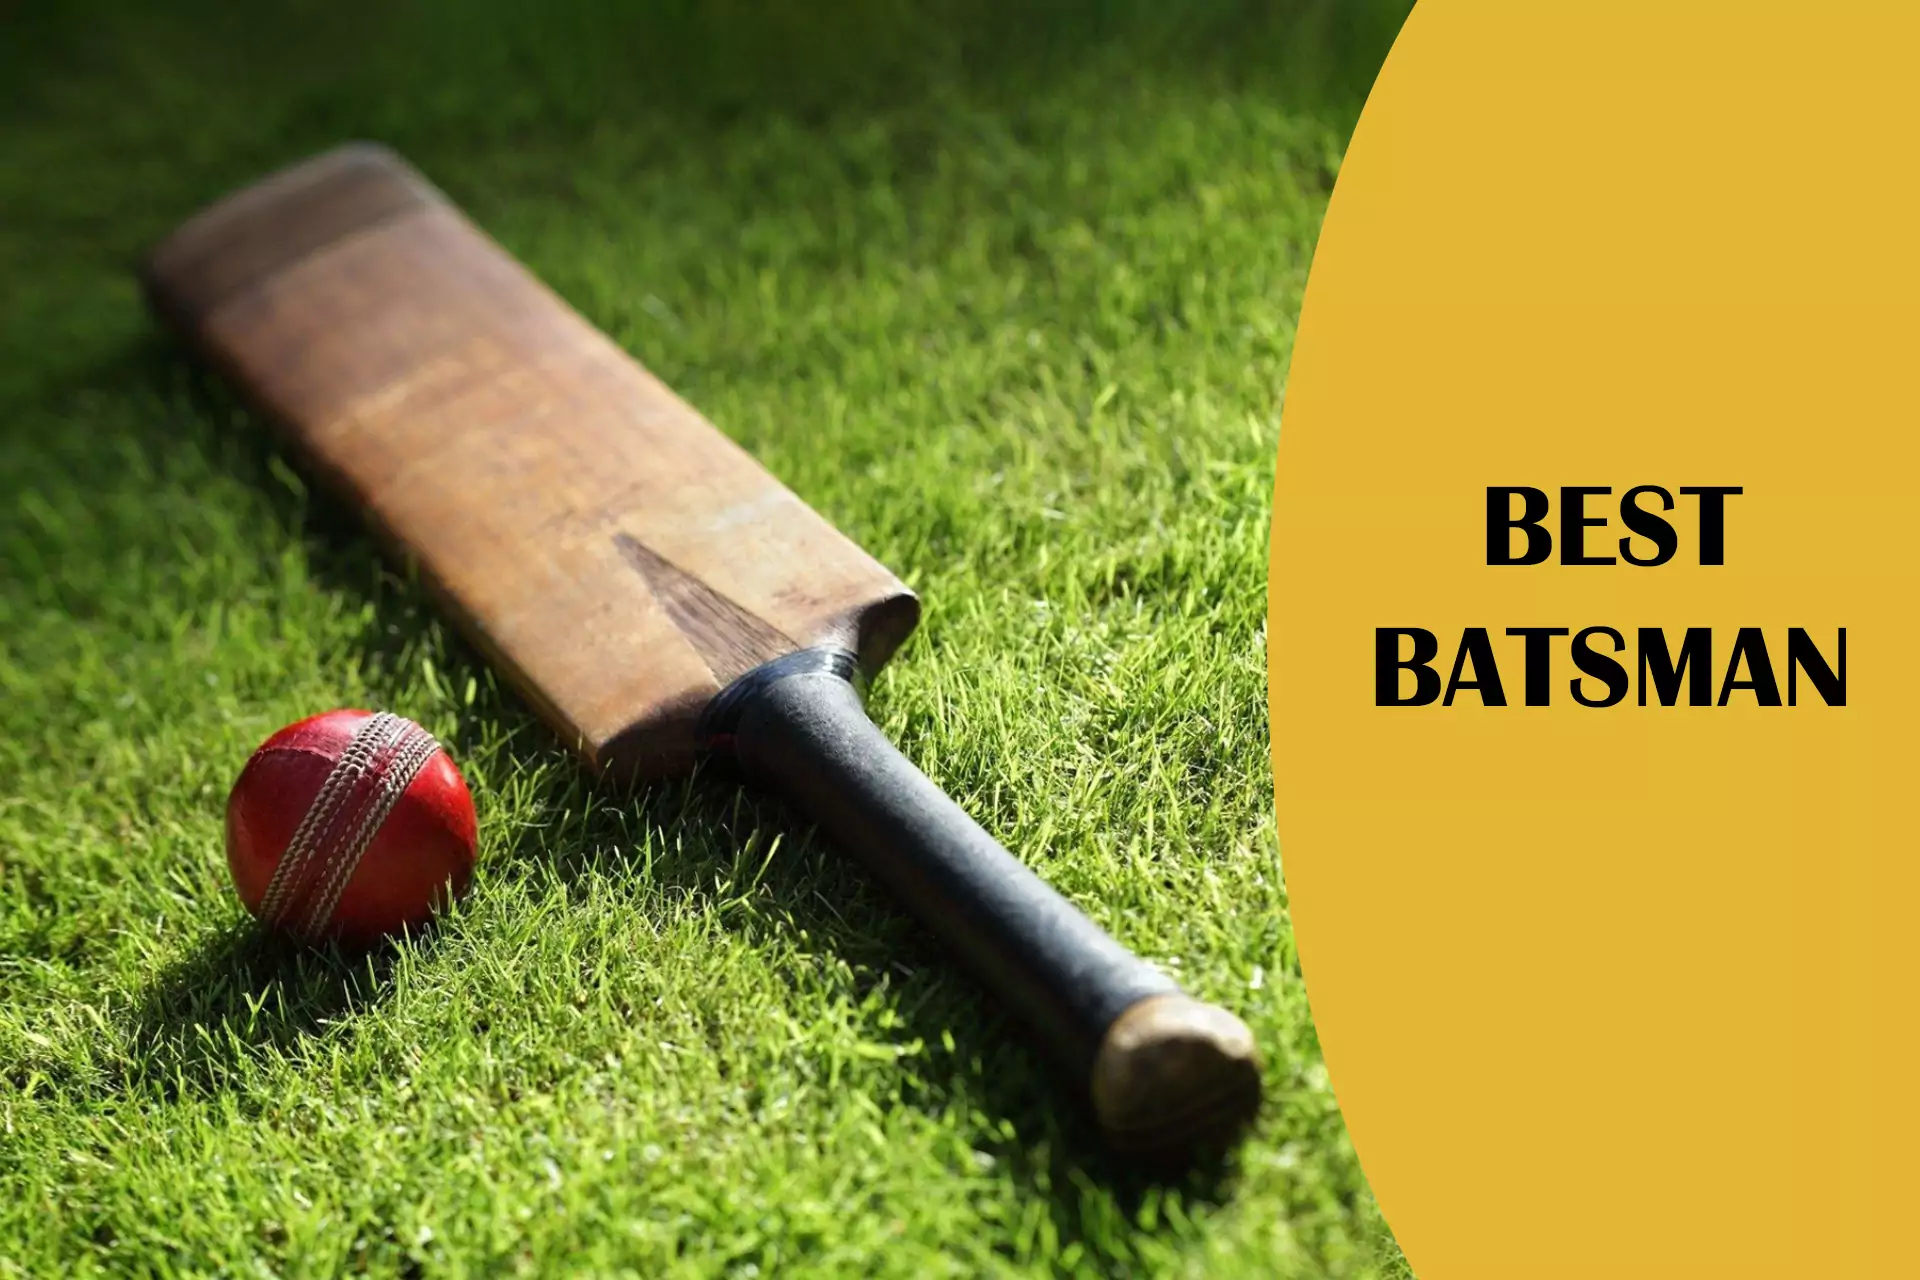 Betting on the Best Batsman is available.